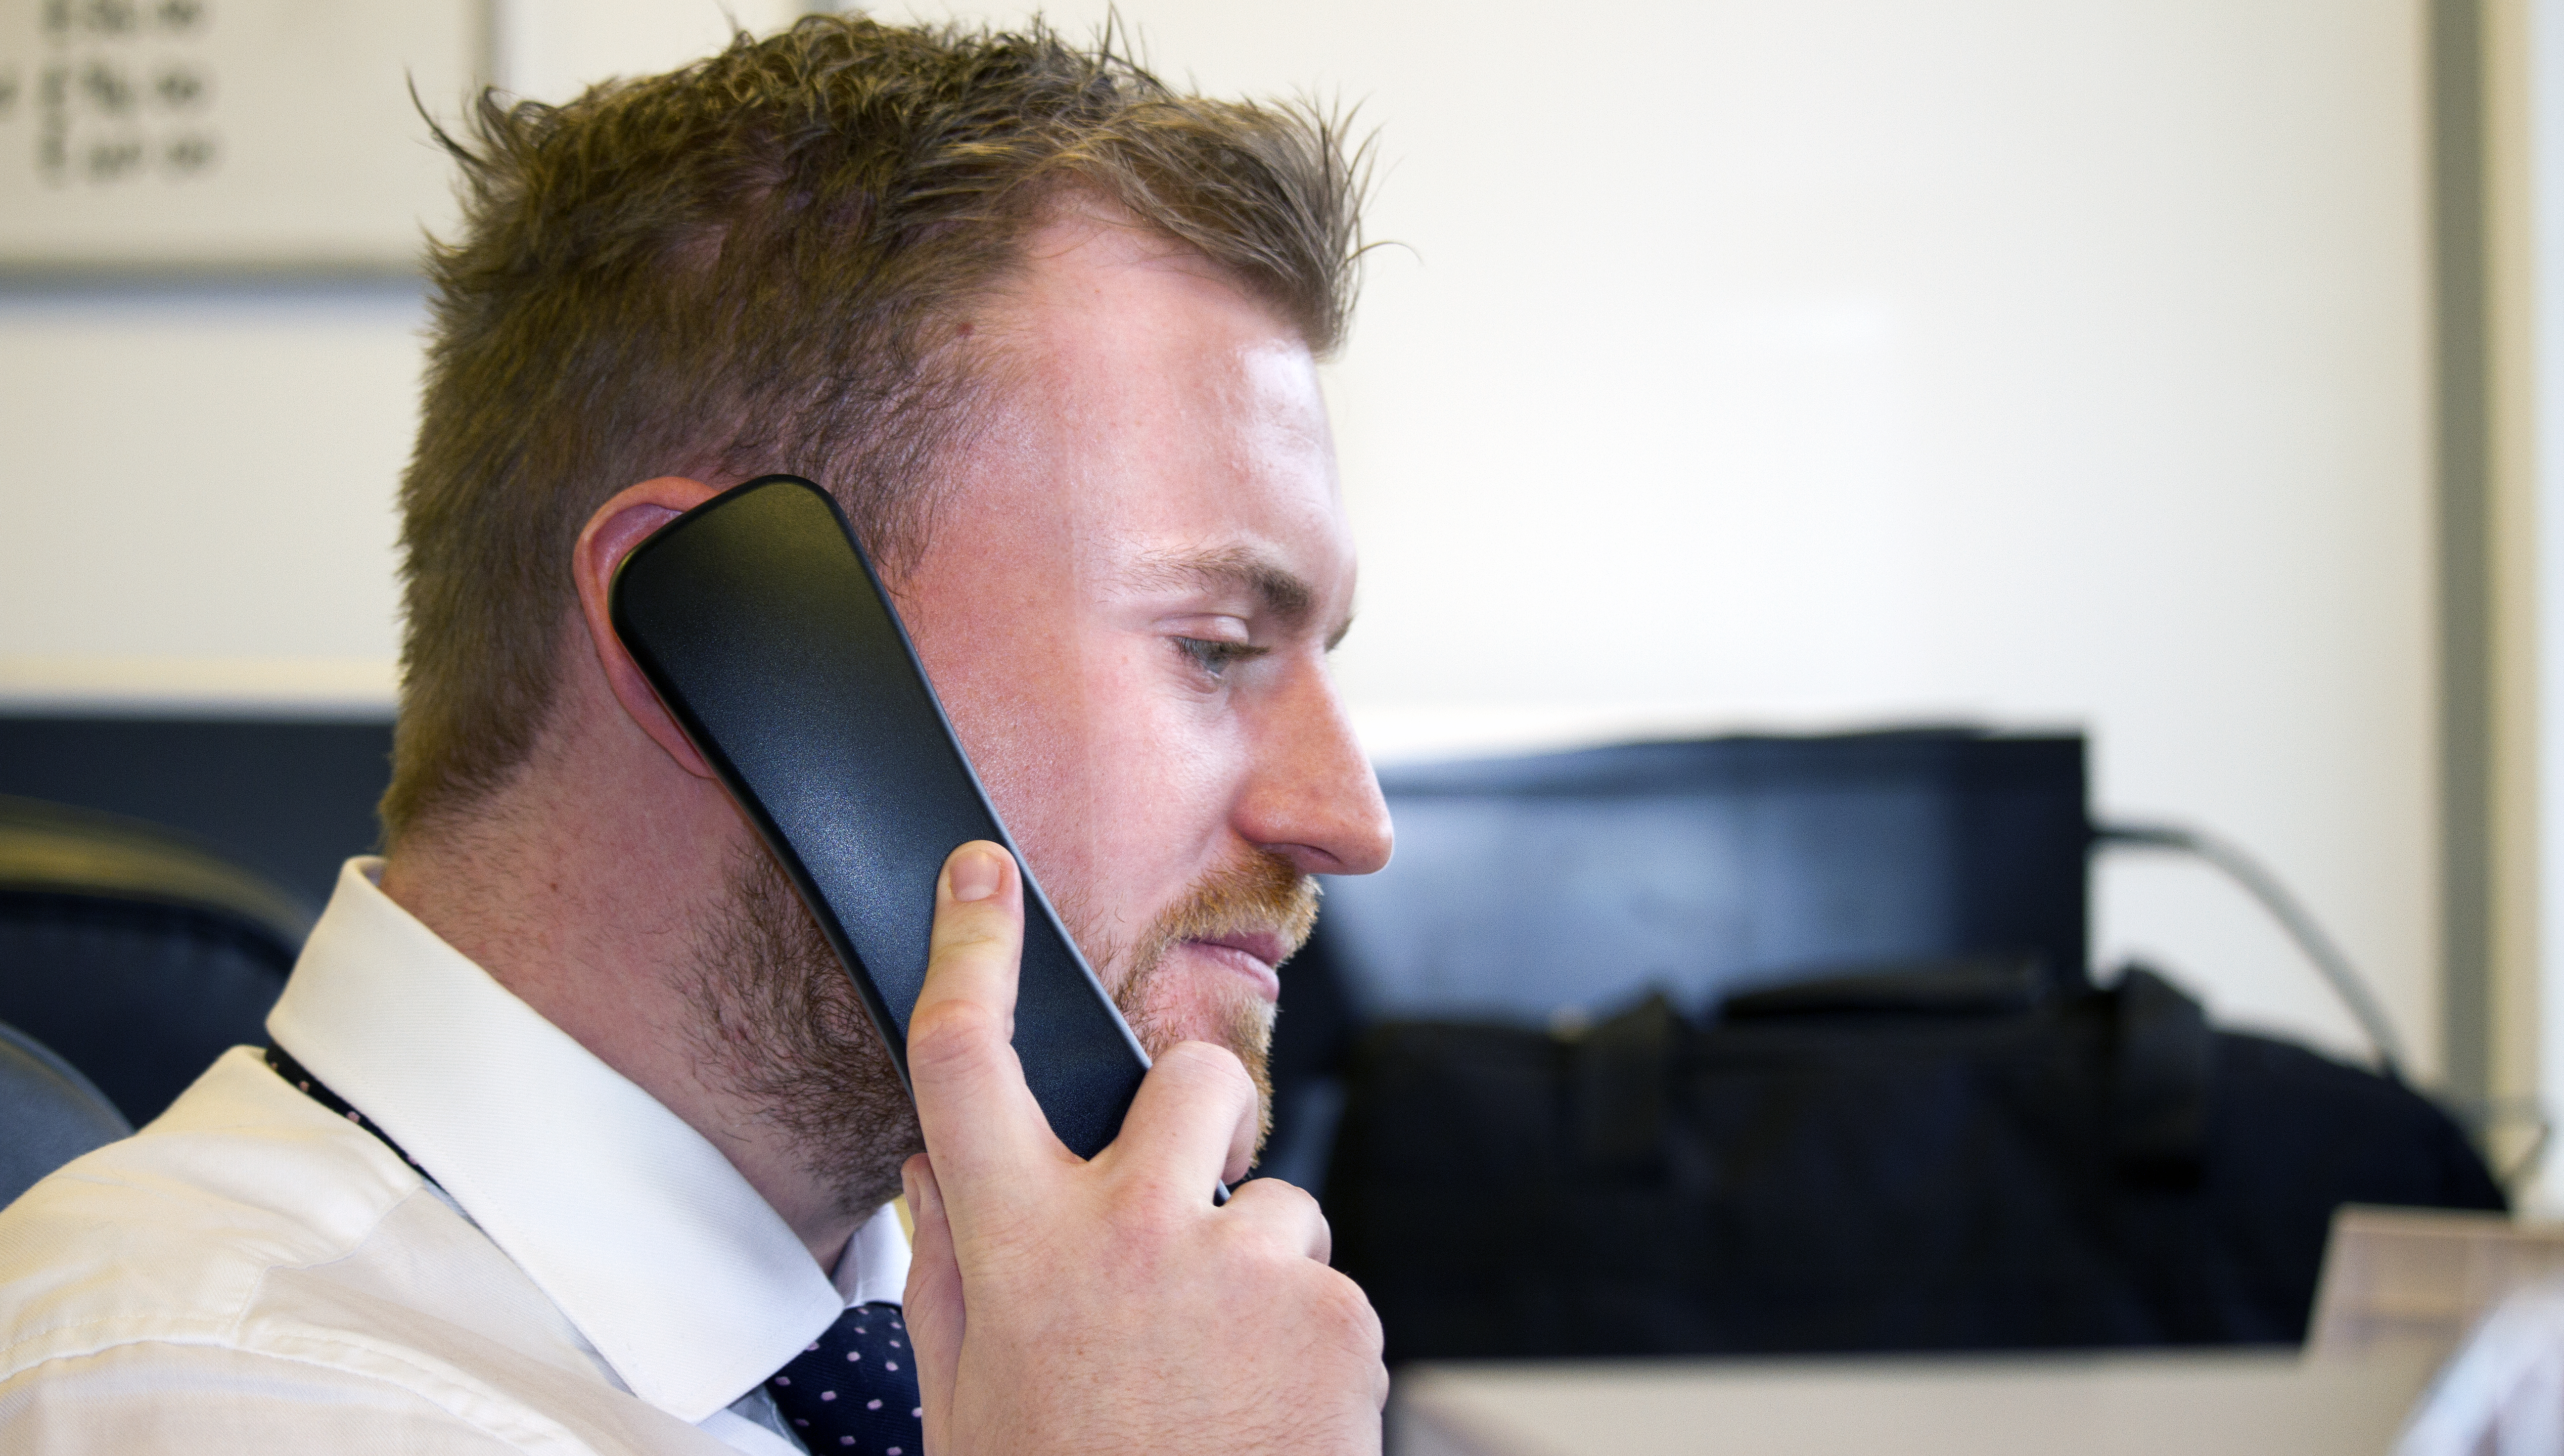 Are telephones still valuable to businesses